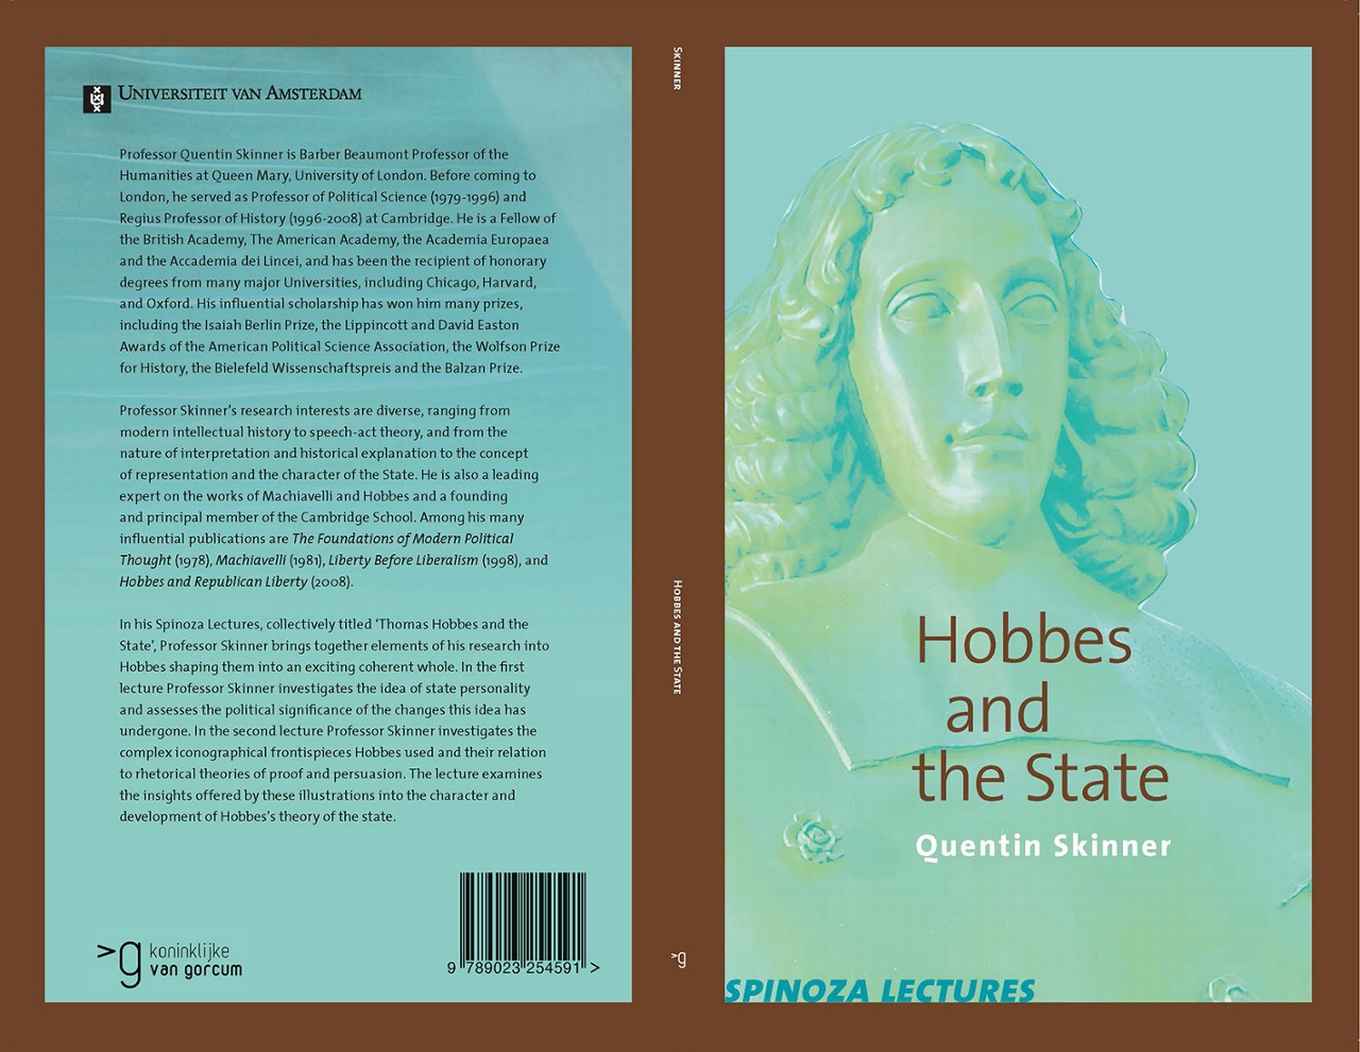 Hobbes and the State